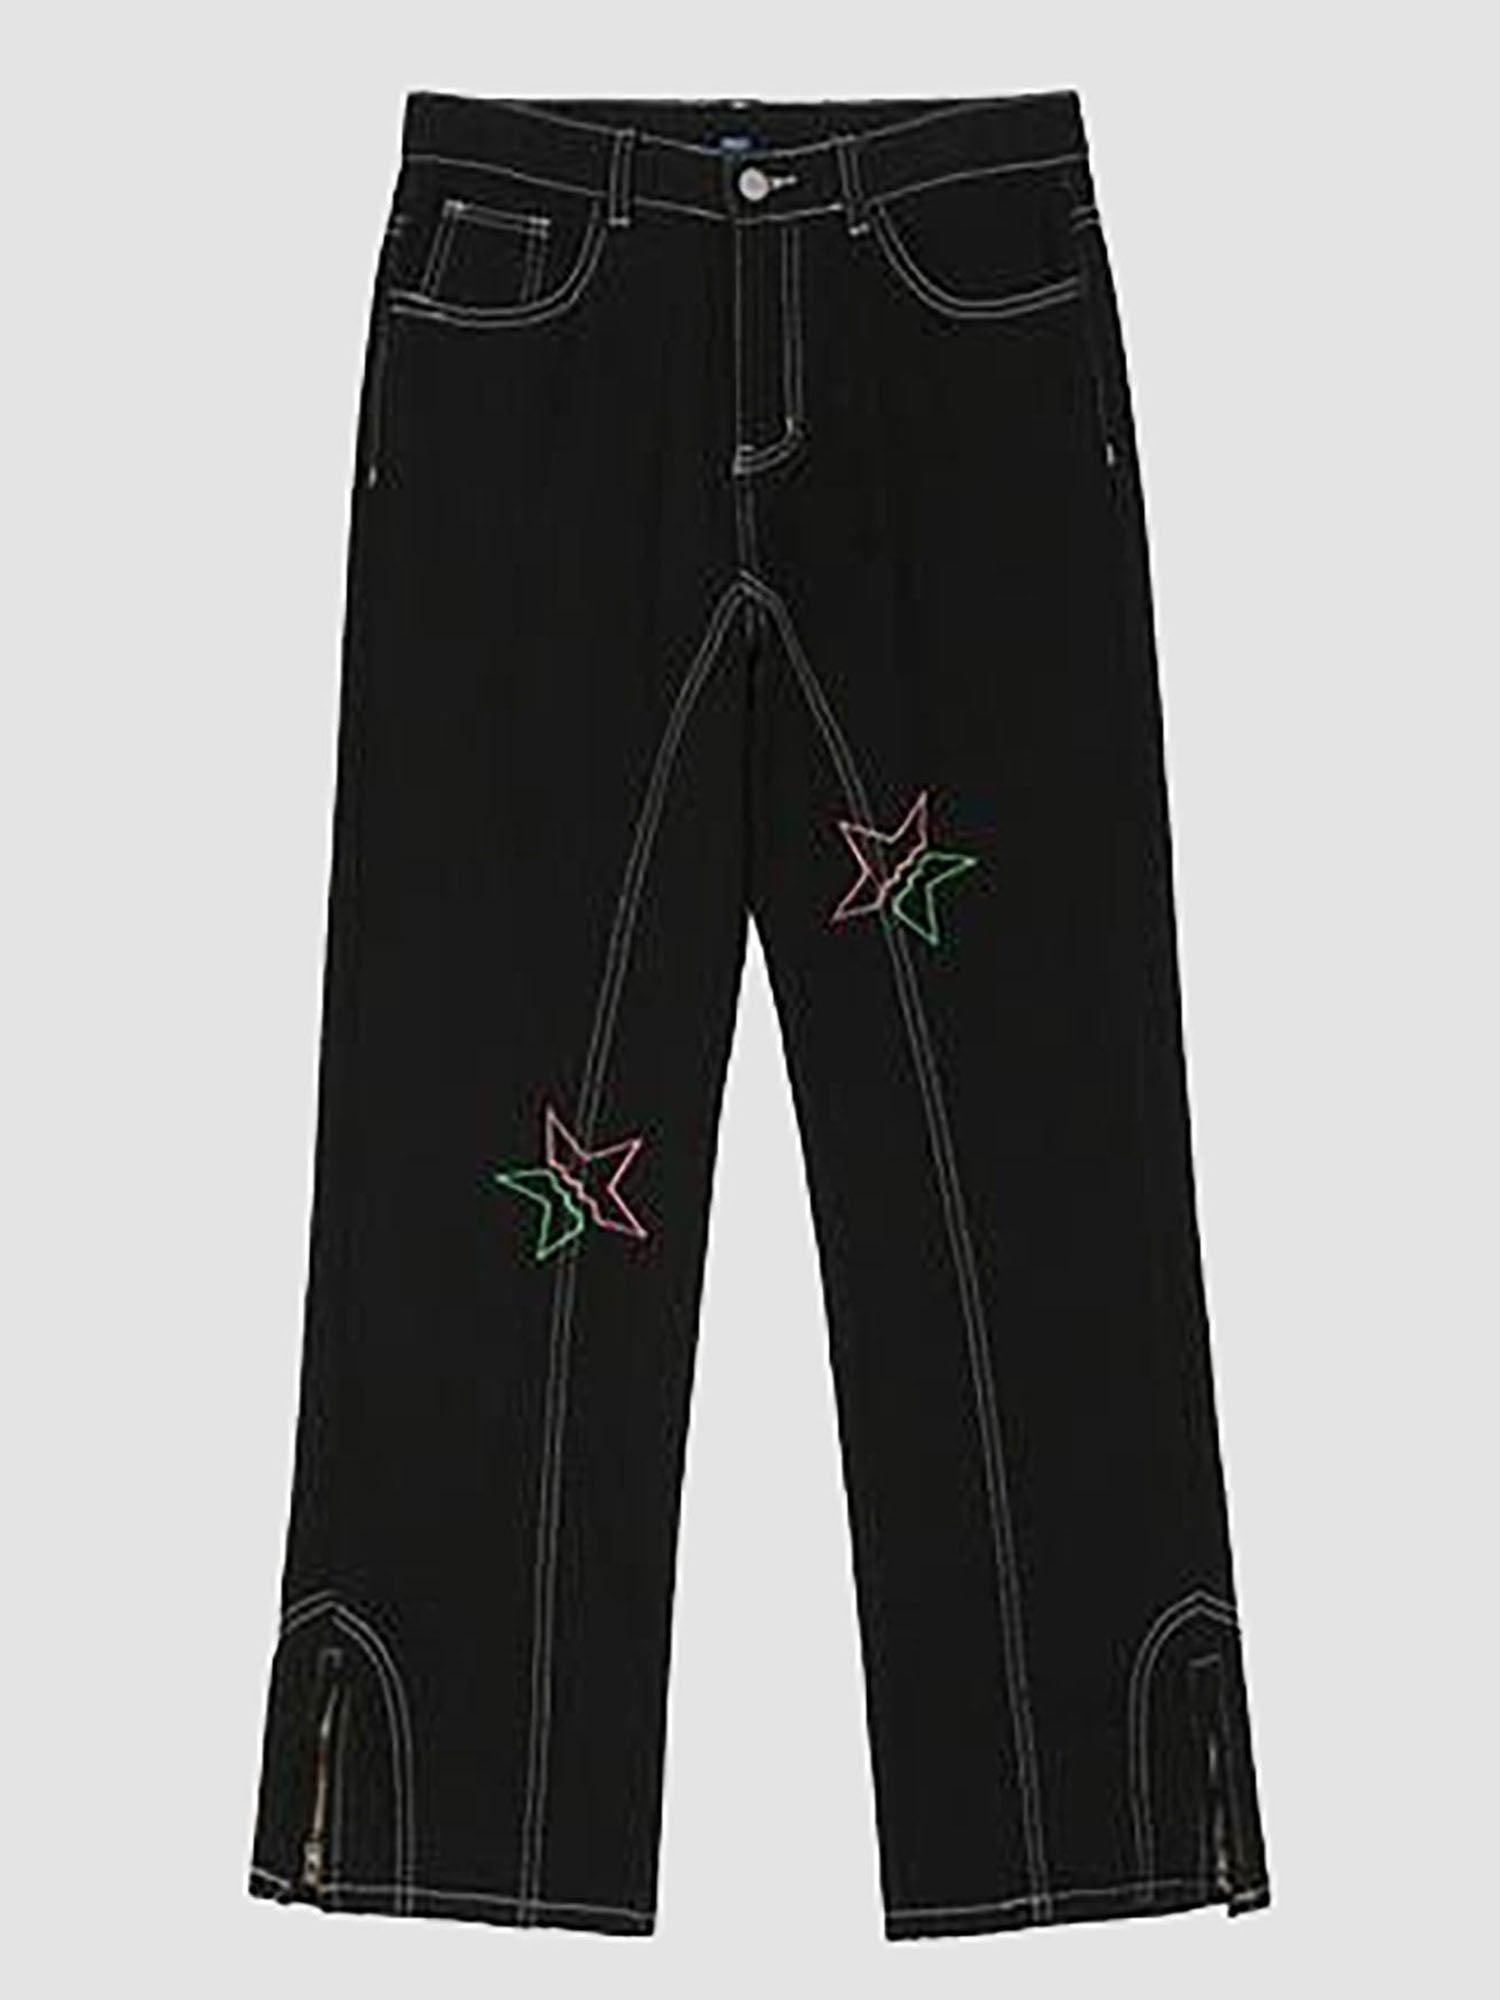 JUSTNOTAG Retro Flare Embroidery Fit Flare Jeans